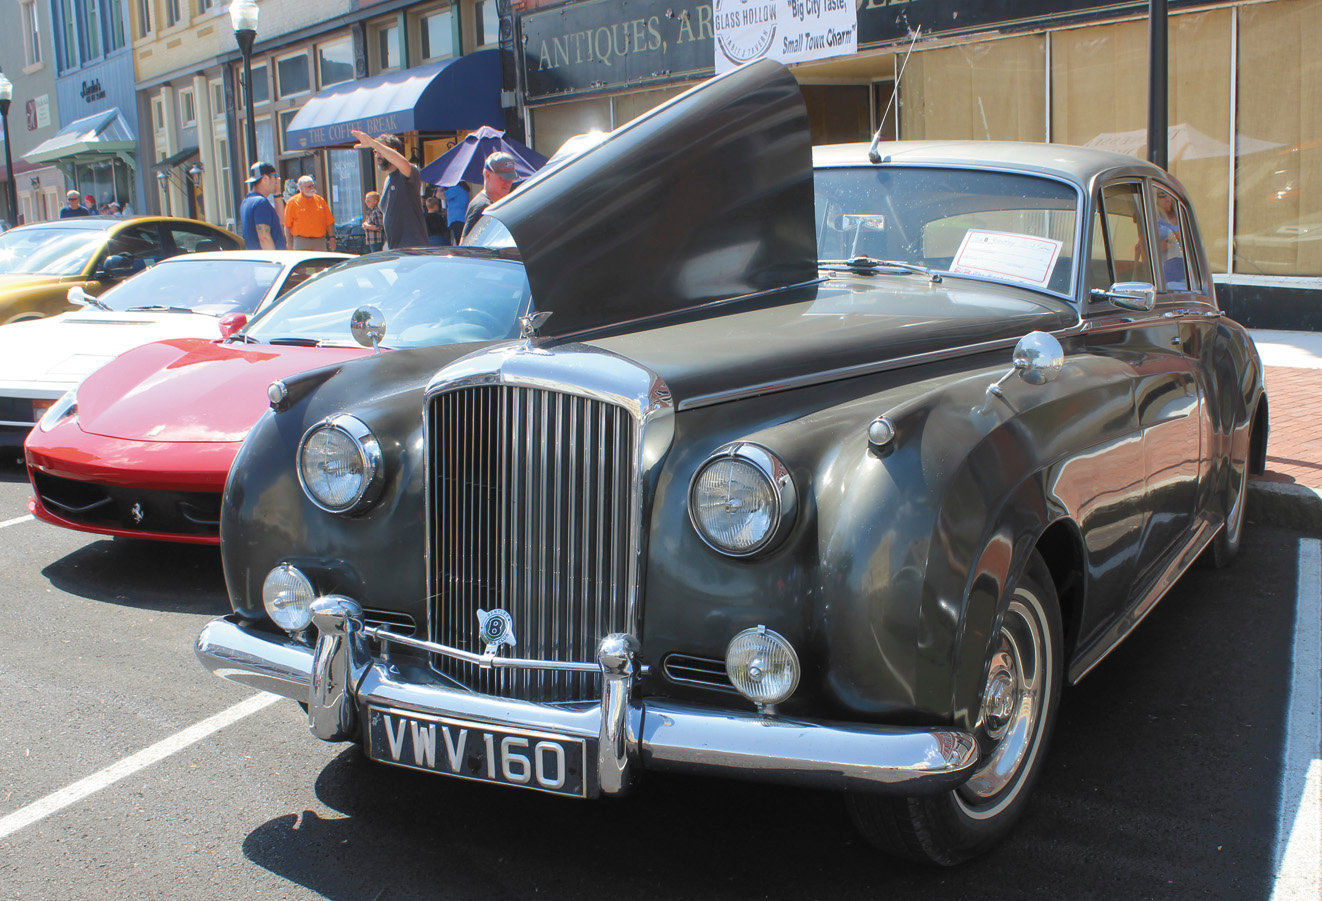 Adding a touch of elegance was this 1960 Bentley.